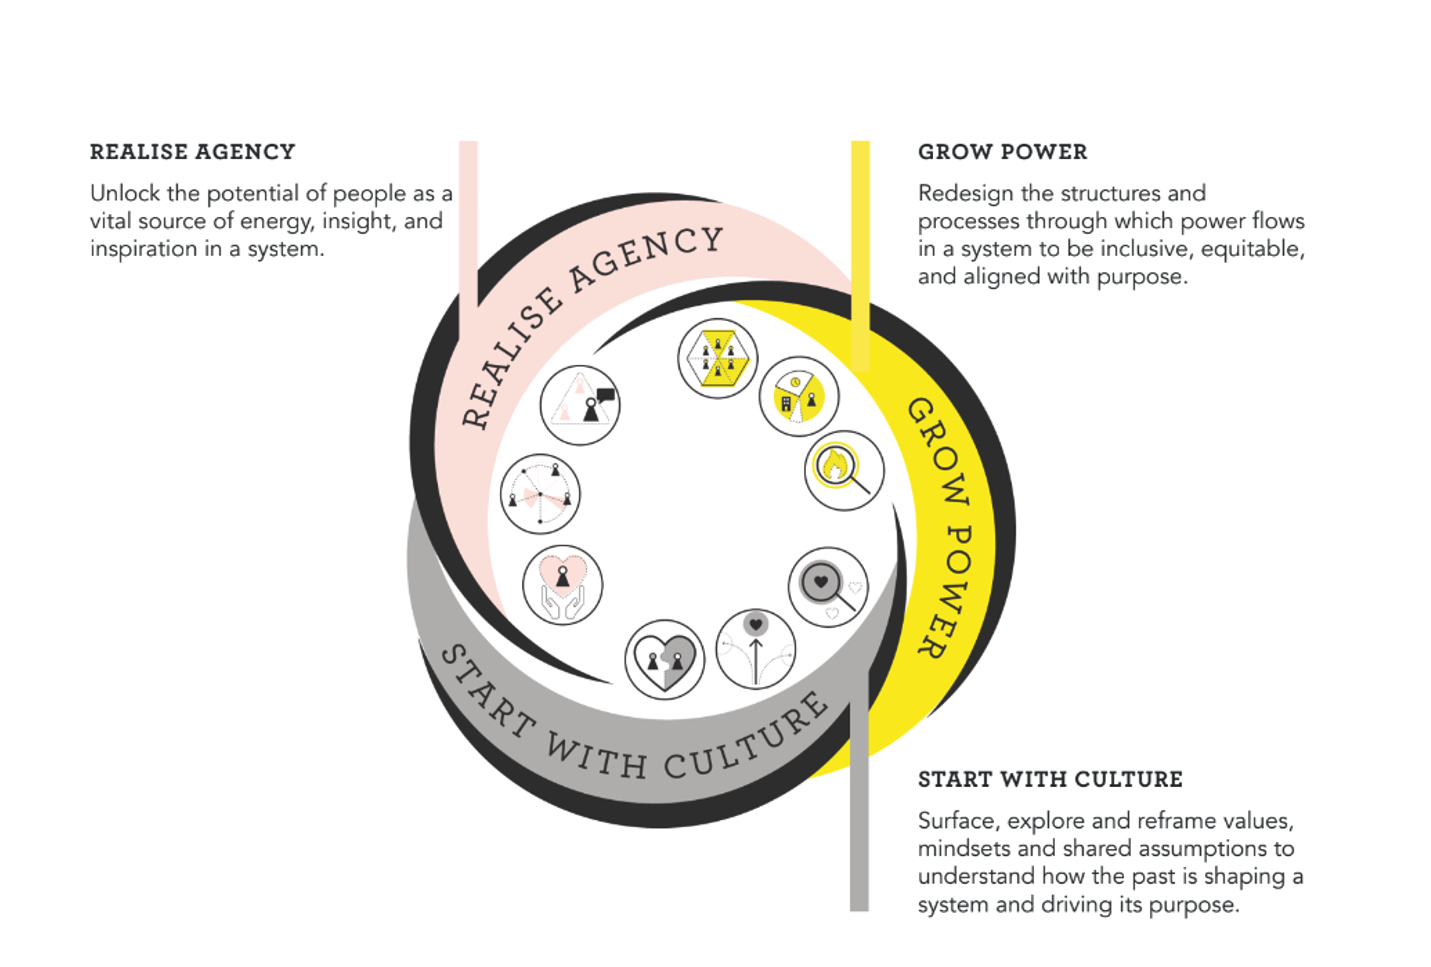 A diagram that has three parts - start with culture, realise agency, grow power